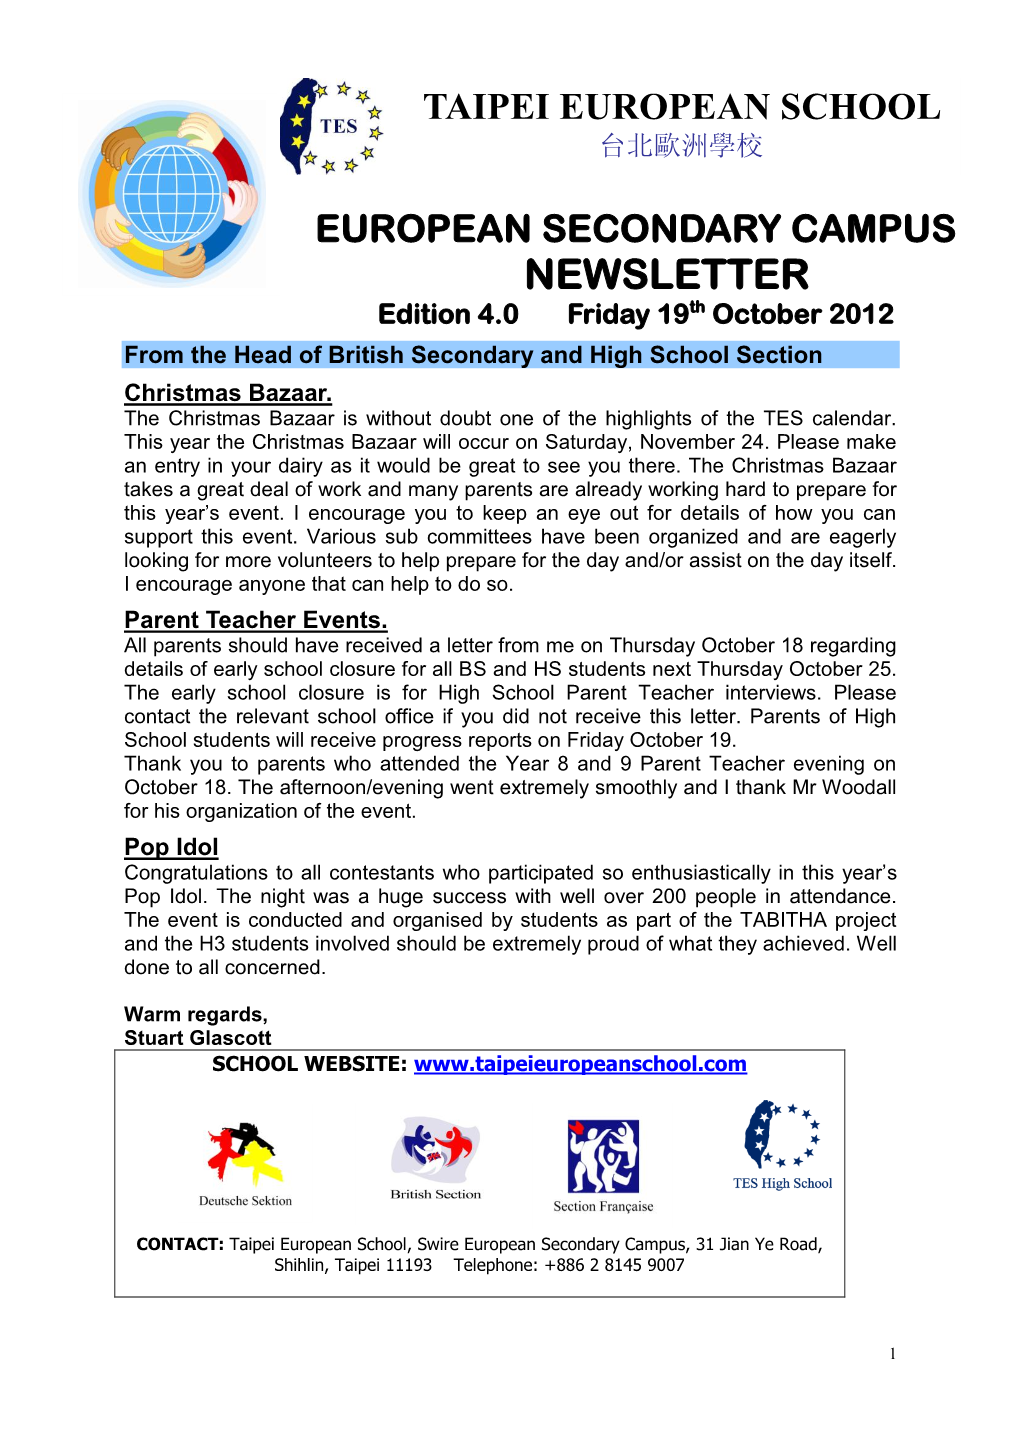 NEWSLETTER Edition 4.0 Friday 19Th October 2012